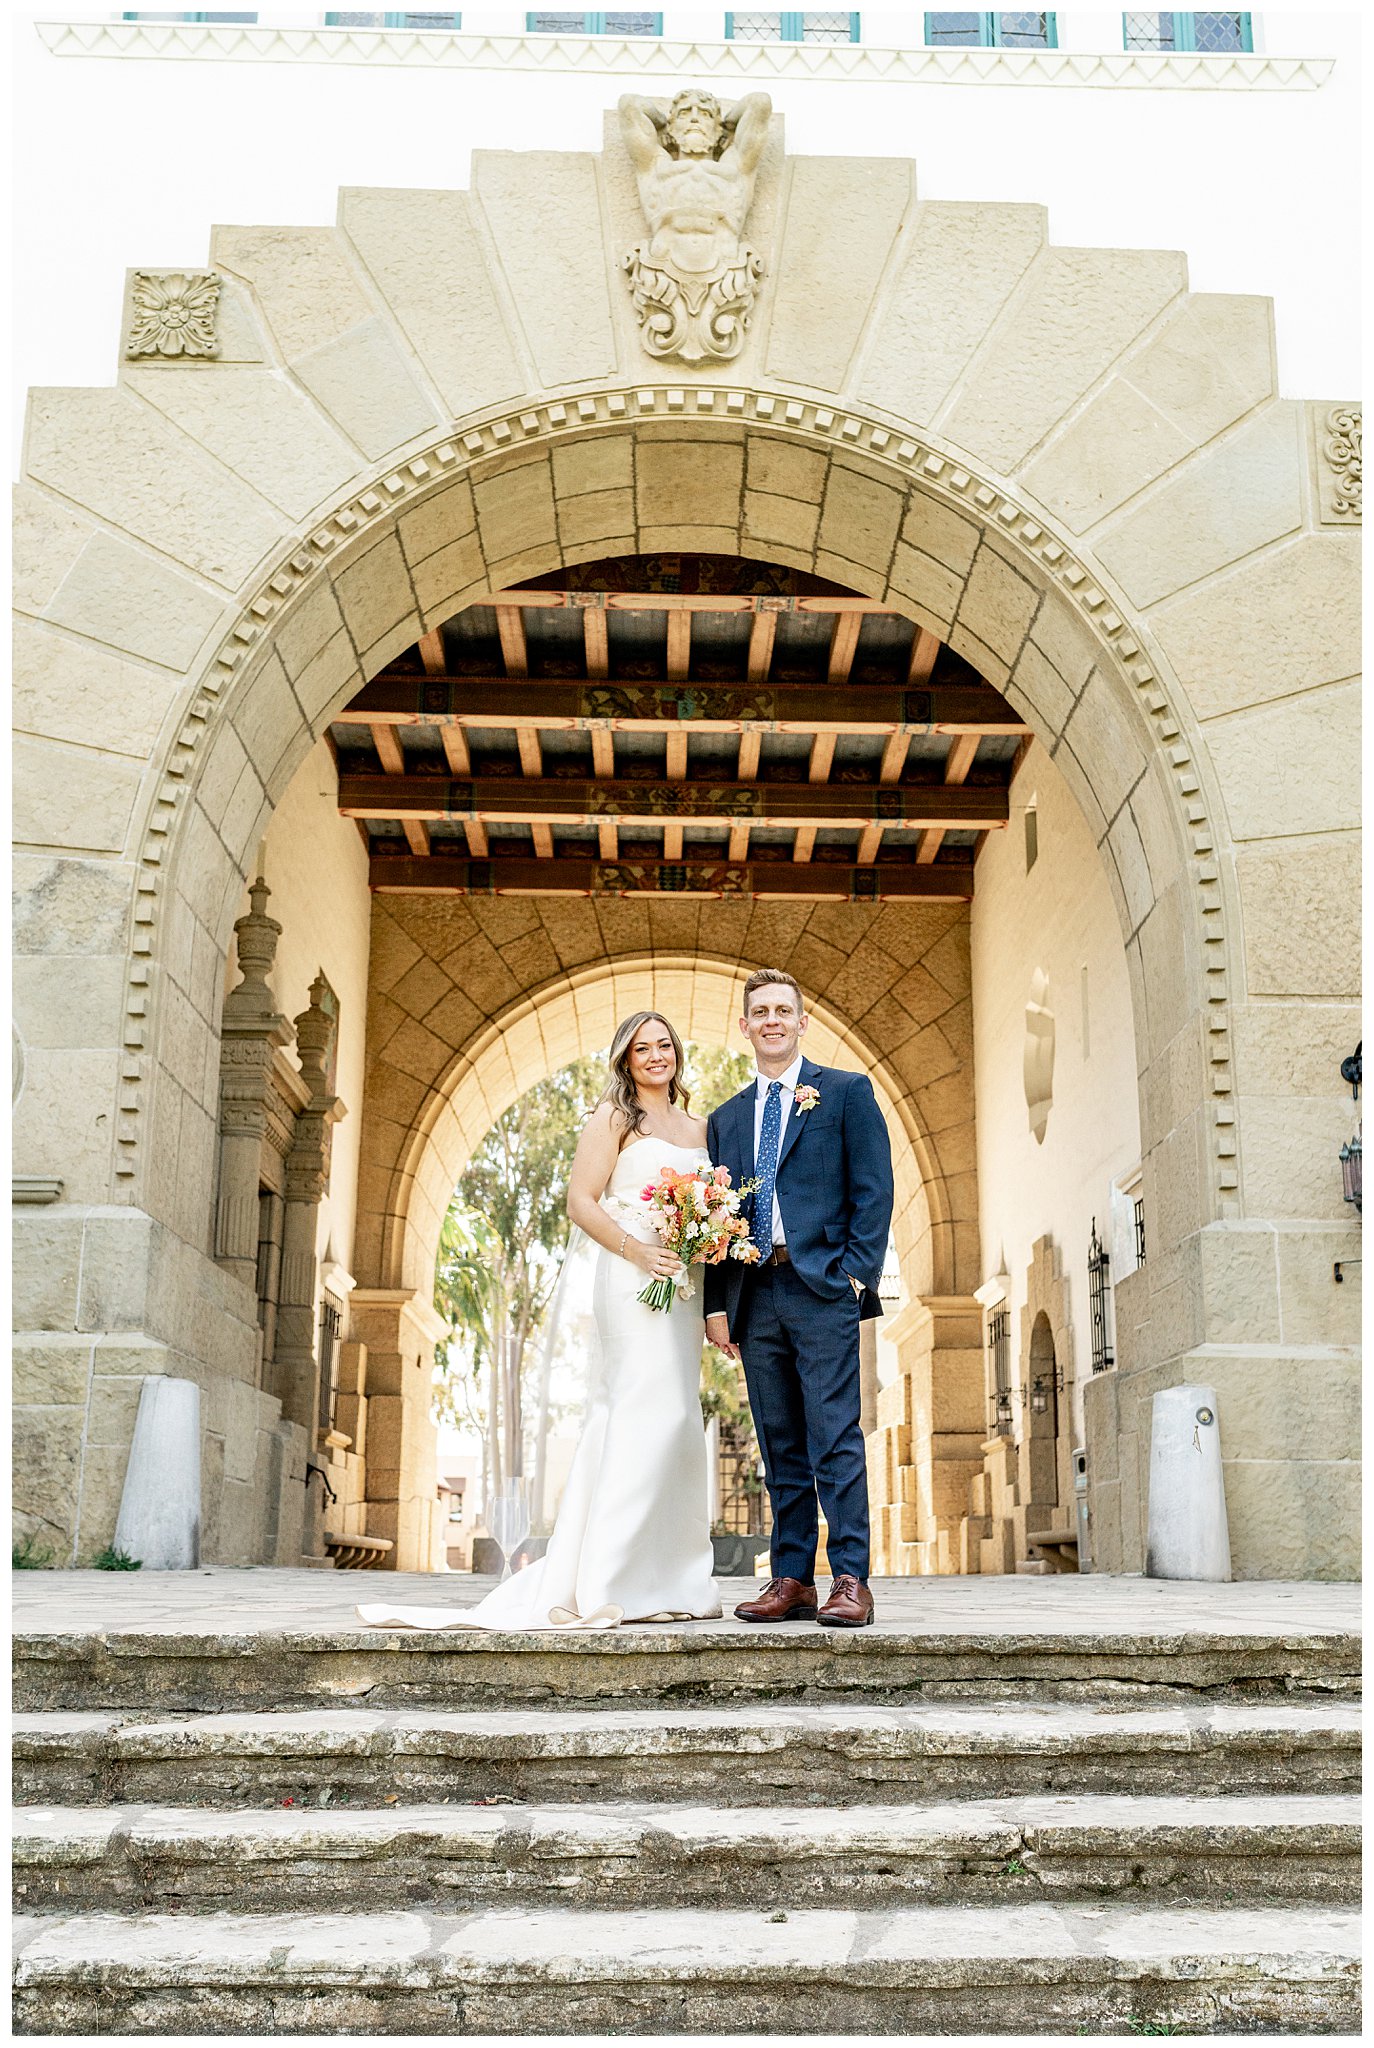 Bride and Groom stand in the archway at the Santa Barbara courthouse on their wedding day.